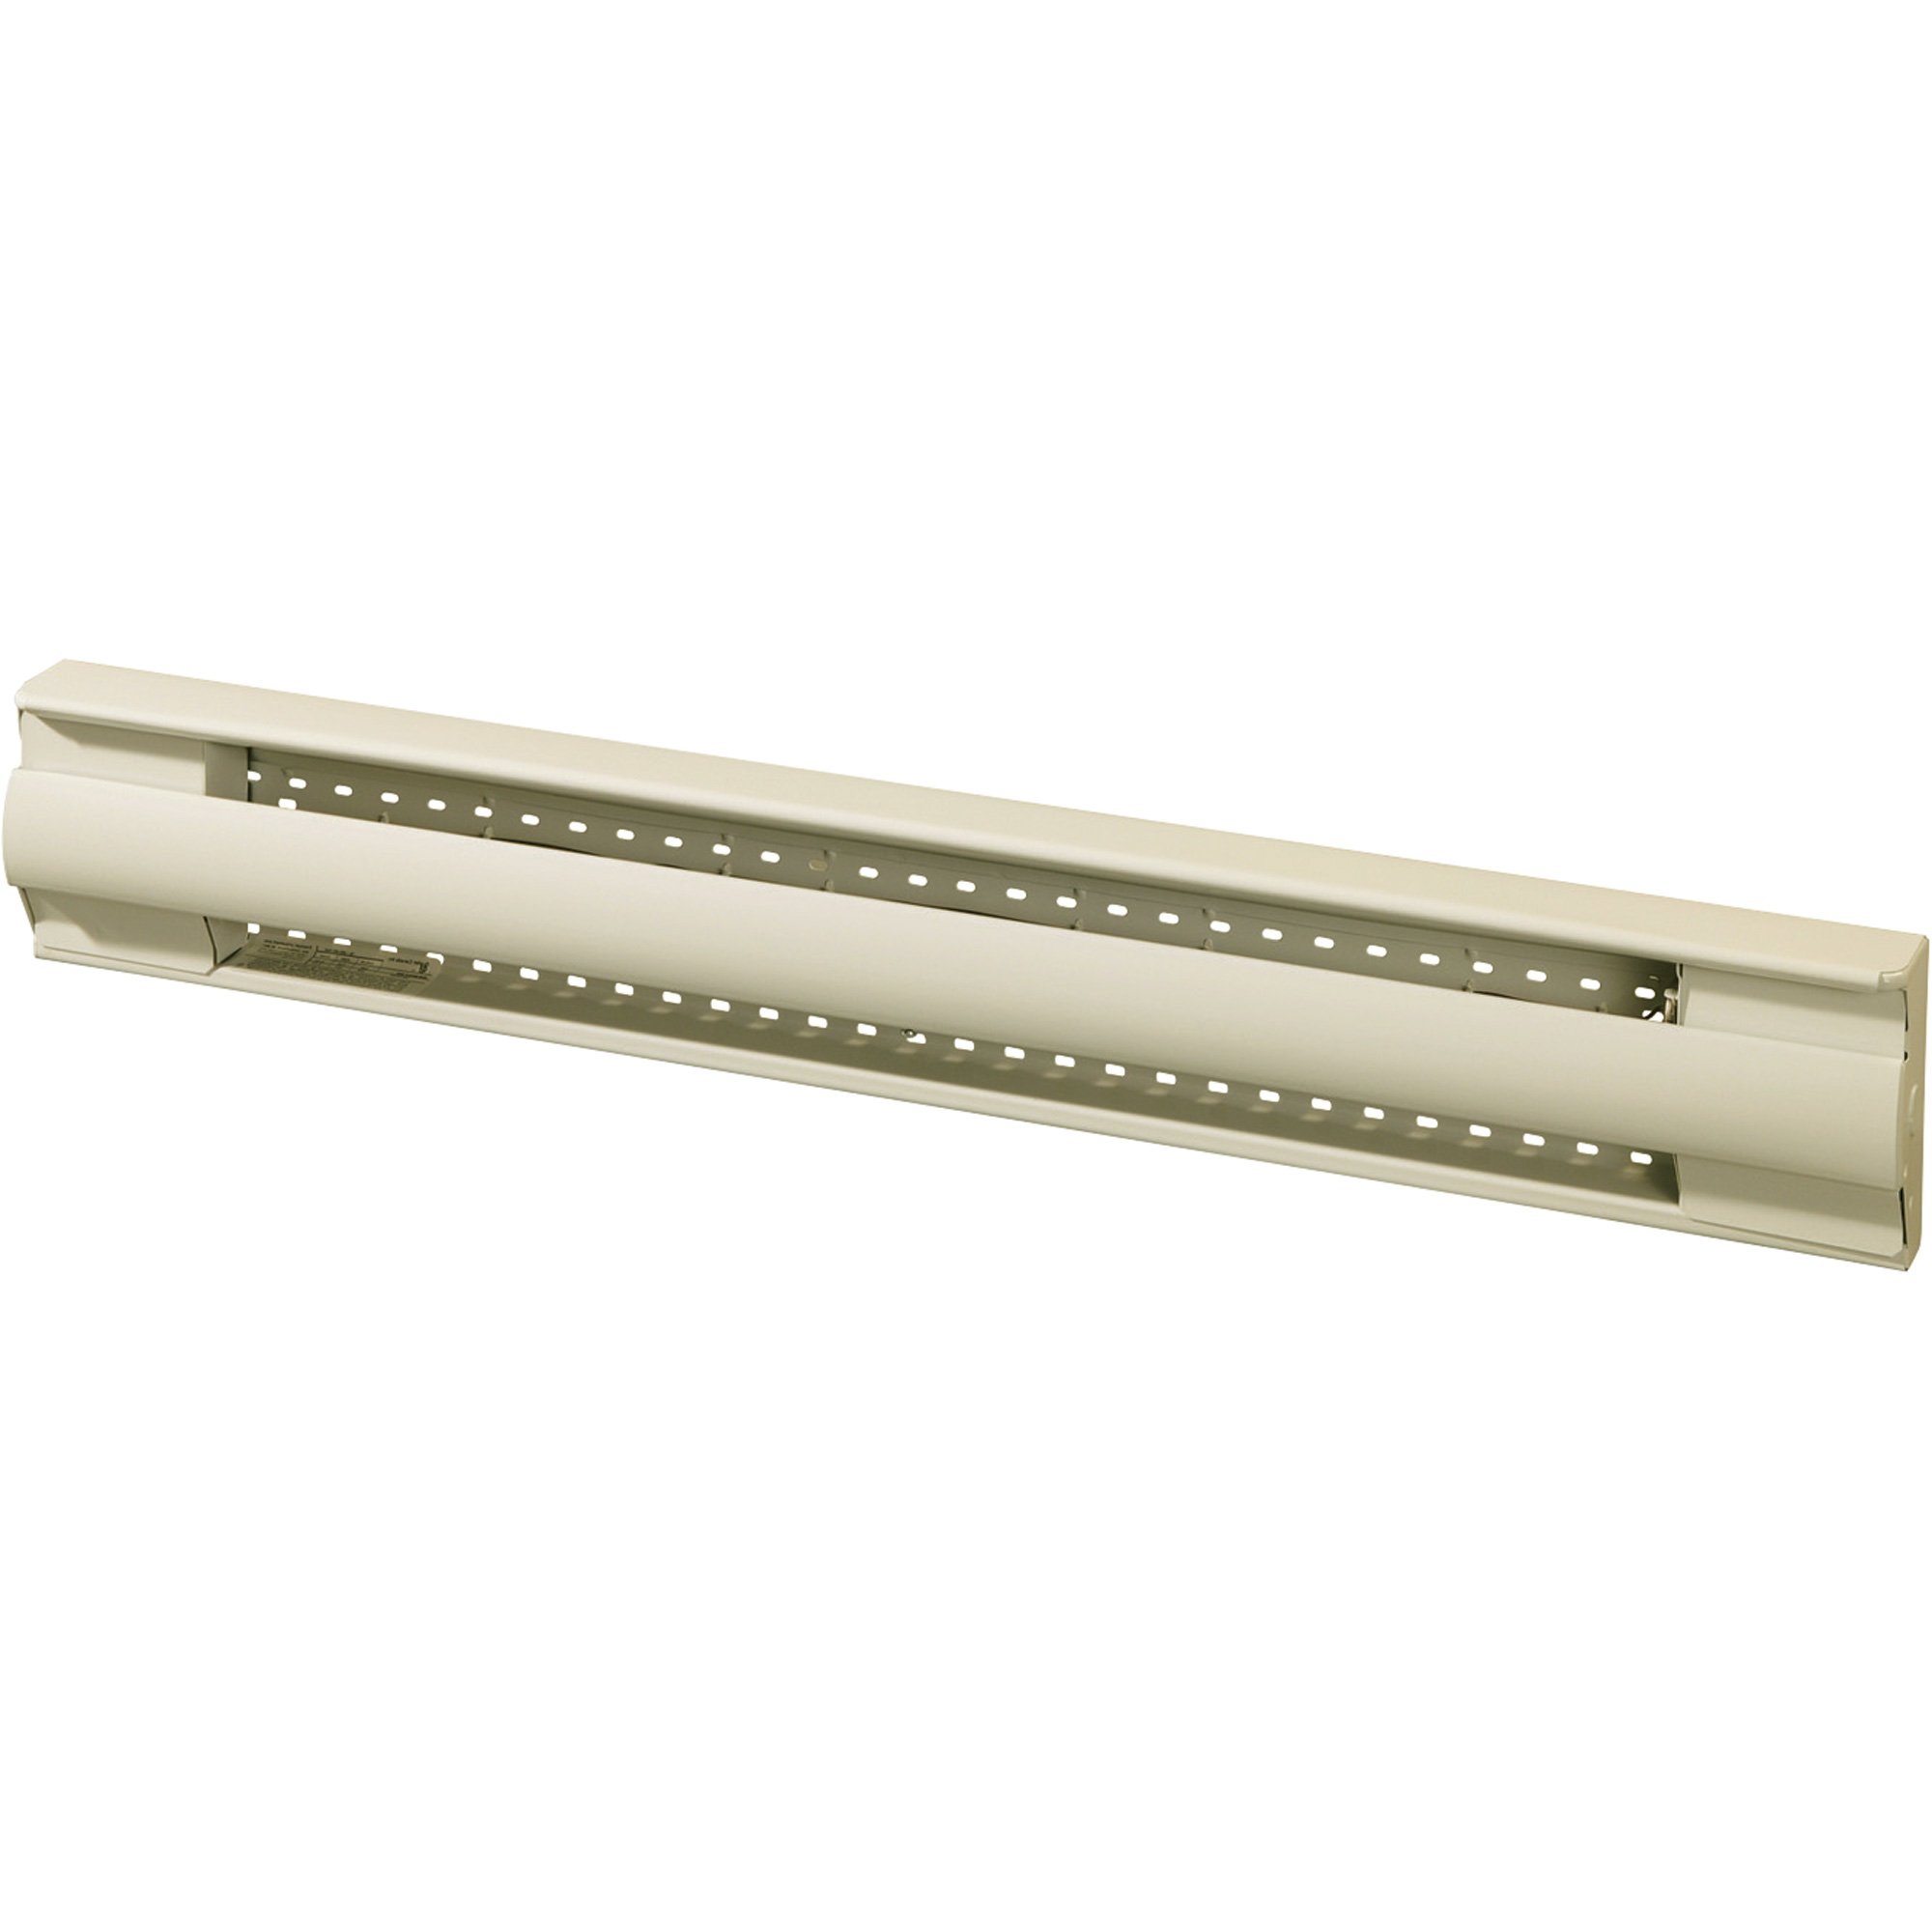 OUE RBH0352AM 2FT STANDARD BASEBOARD HEATER 350W 120V ALMOND 610MM